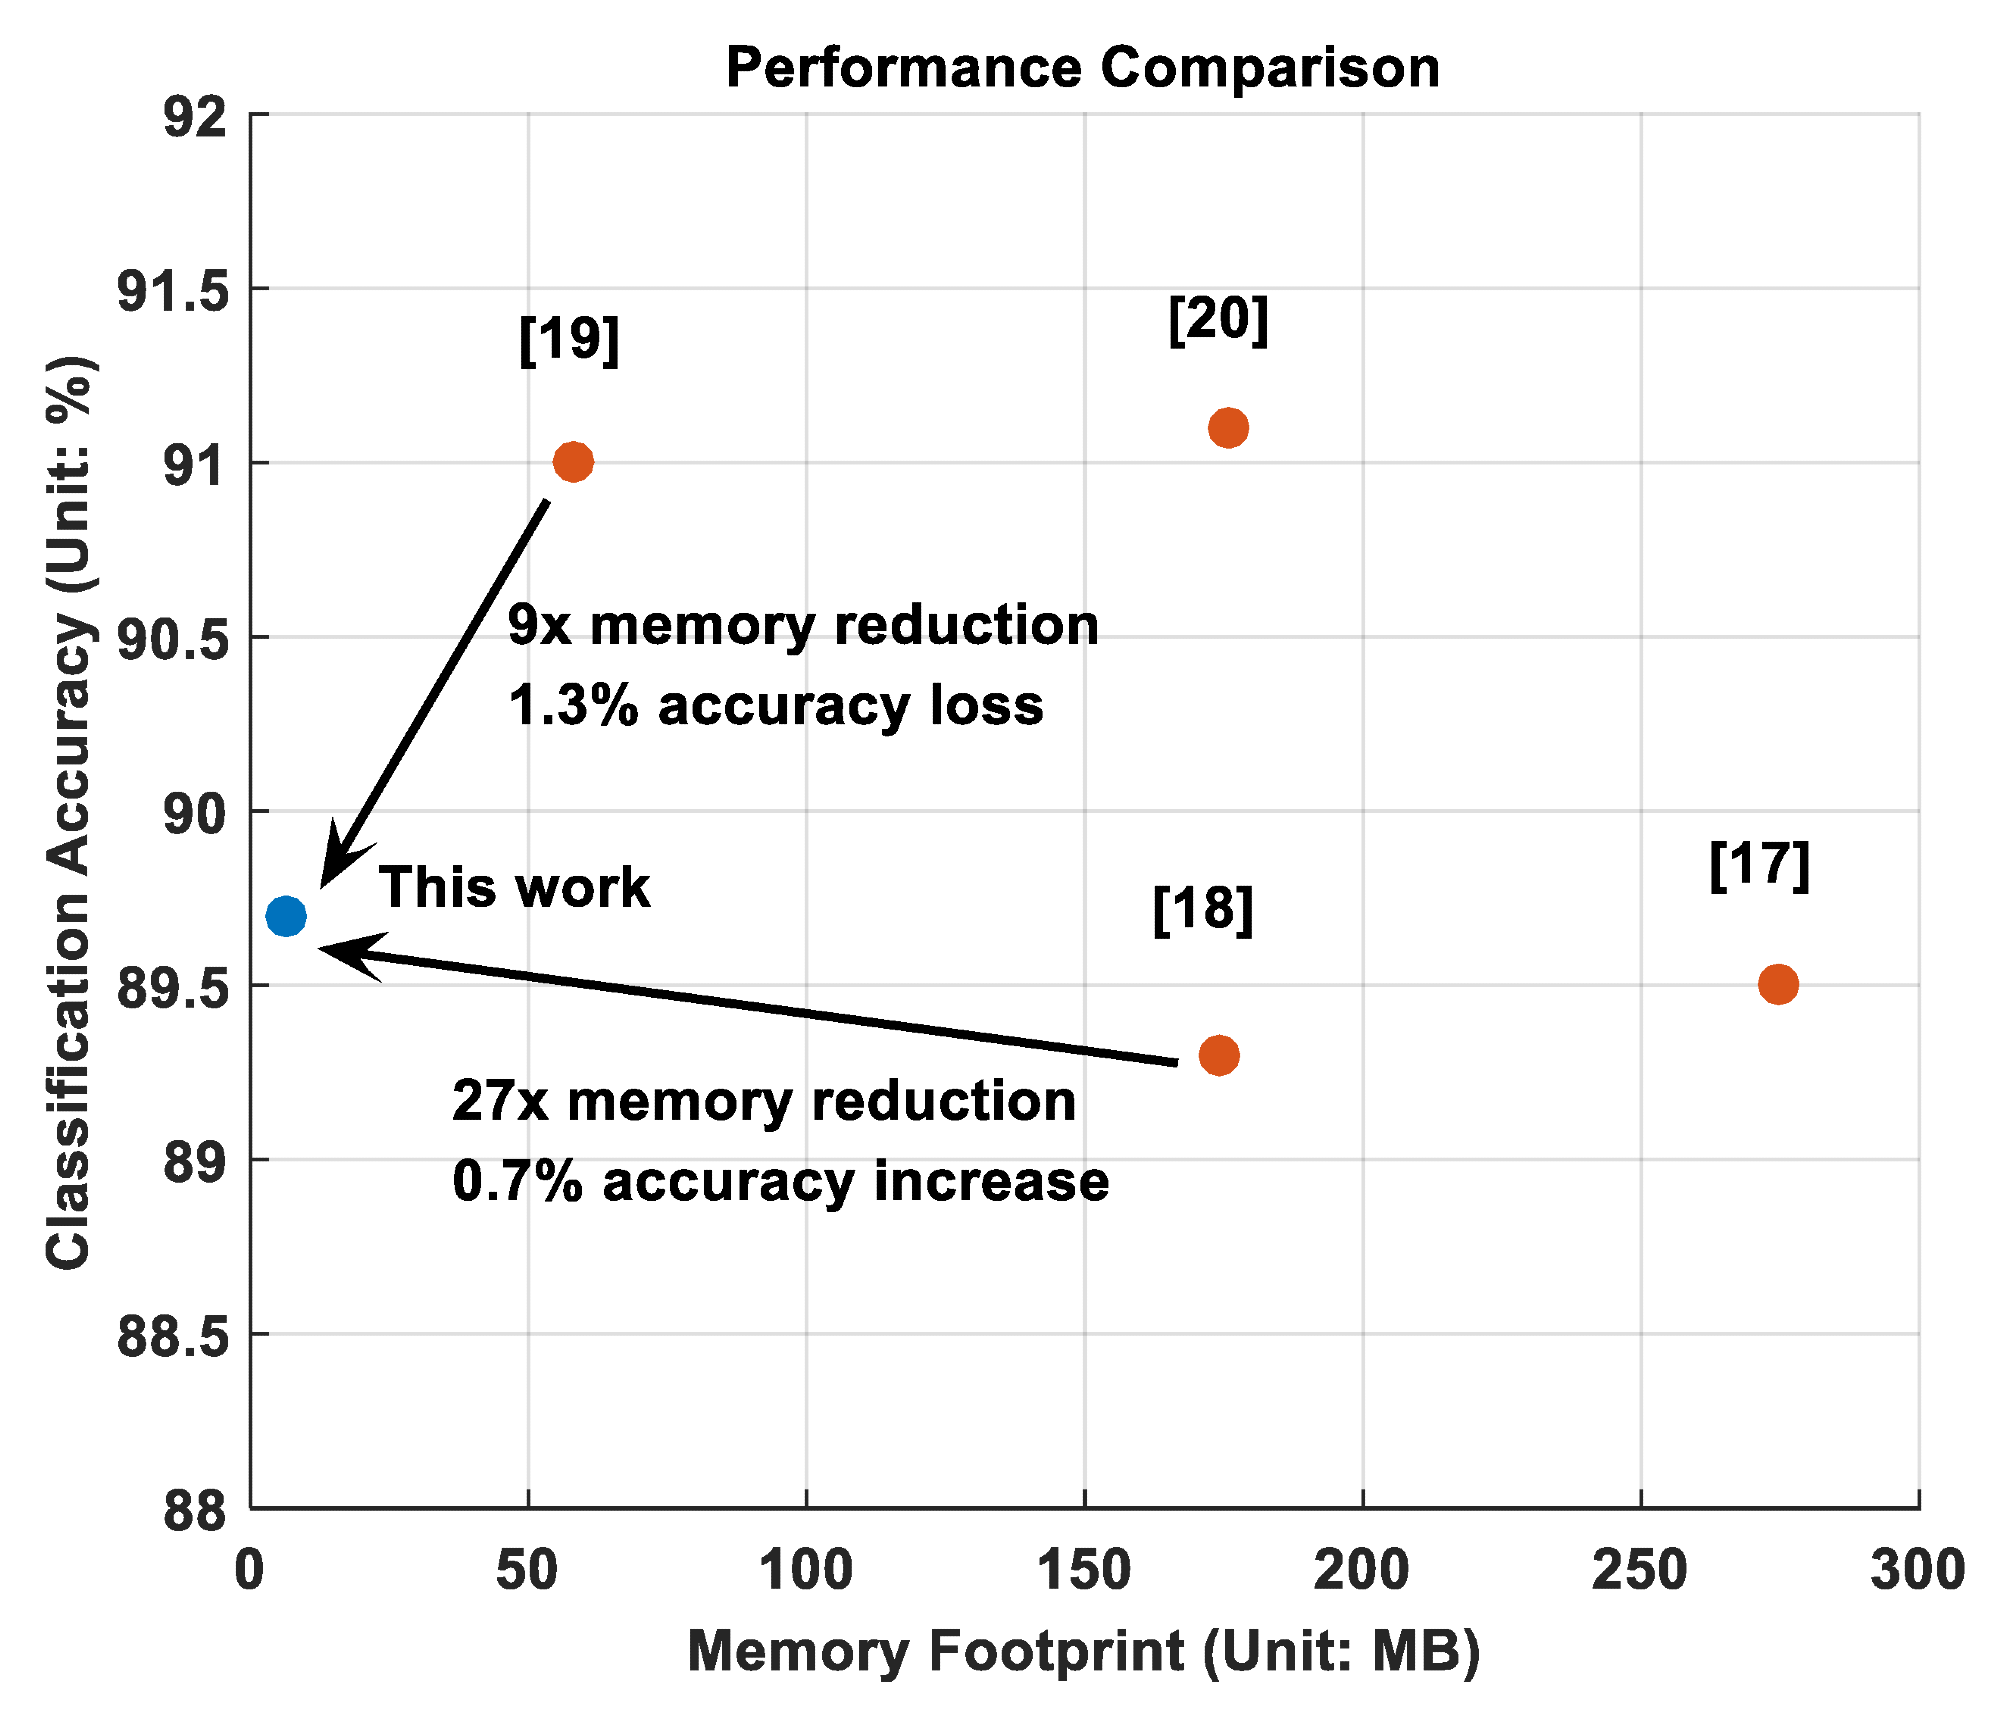 Performance comparison of test accuracy vs. memory footprint between this work and the existing state-of-the-art works in the literature